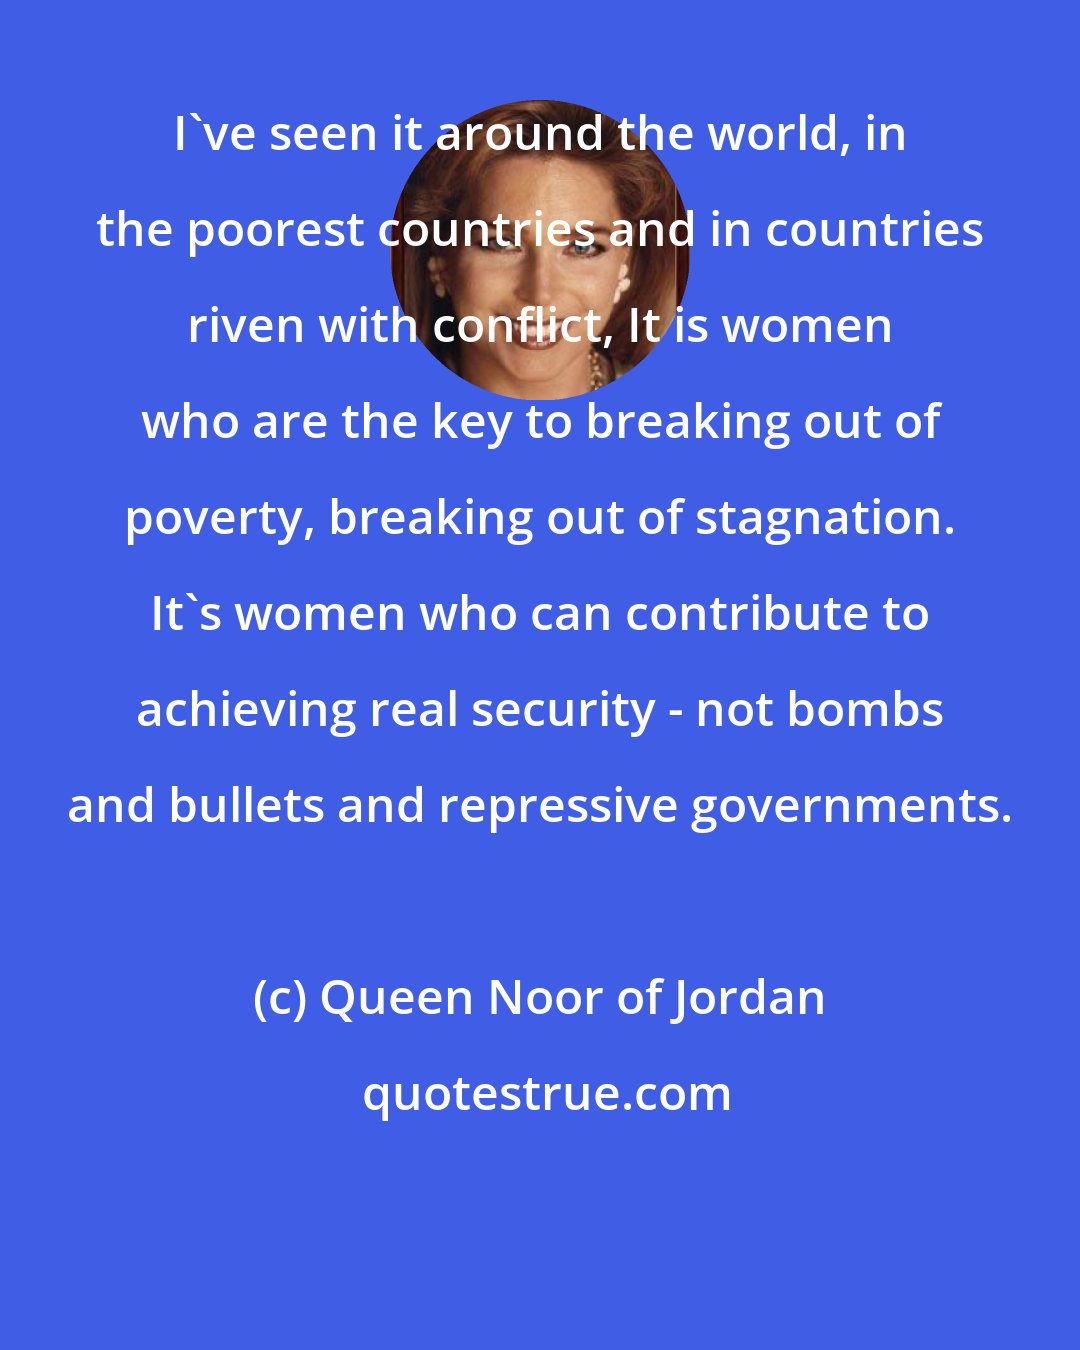 Queen Noor of Jordan: I've seen it around the world, in the poorest countries and in countries riven with conflict, It is women who are the key to breaking out of poverty, breaking out of stagnation. It's women who can contribute to achieving real security - not bombs and bullets and repressive governments.